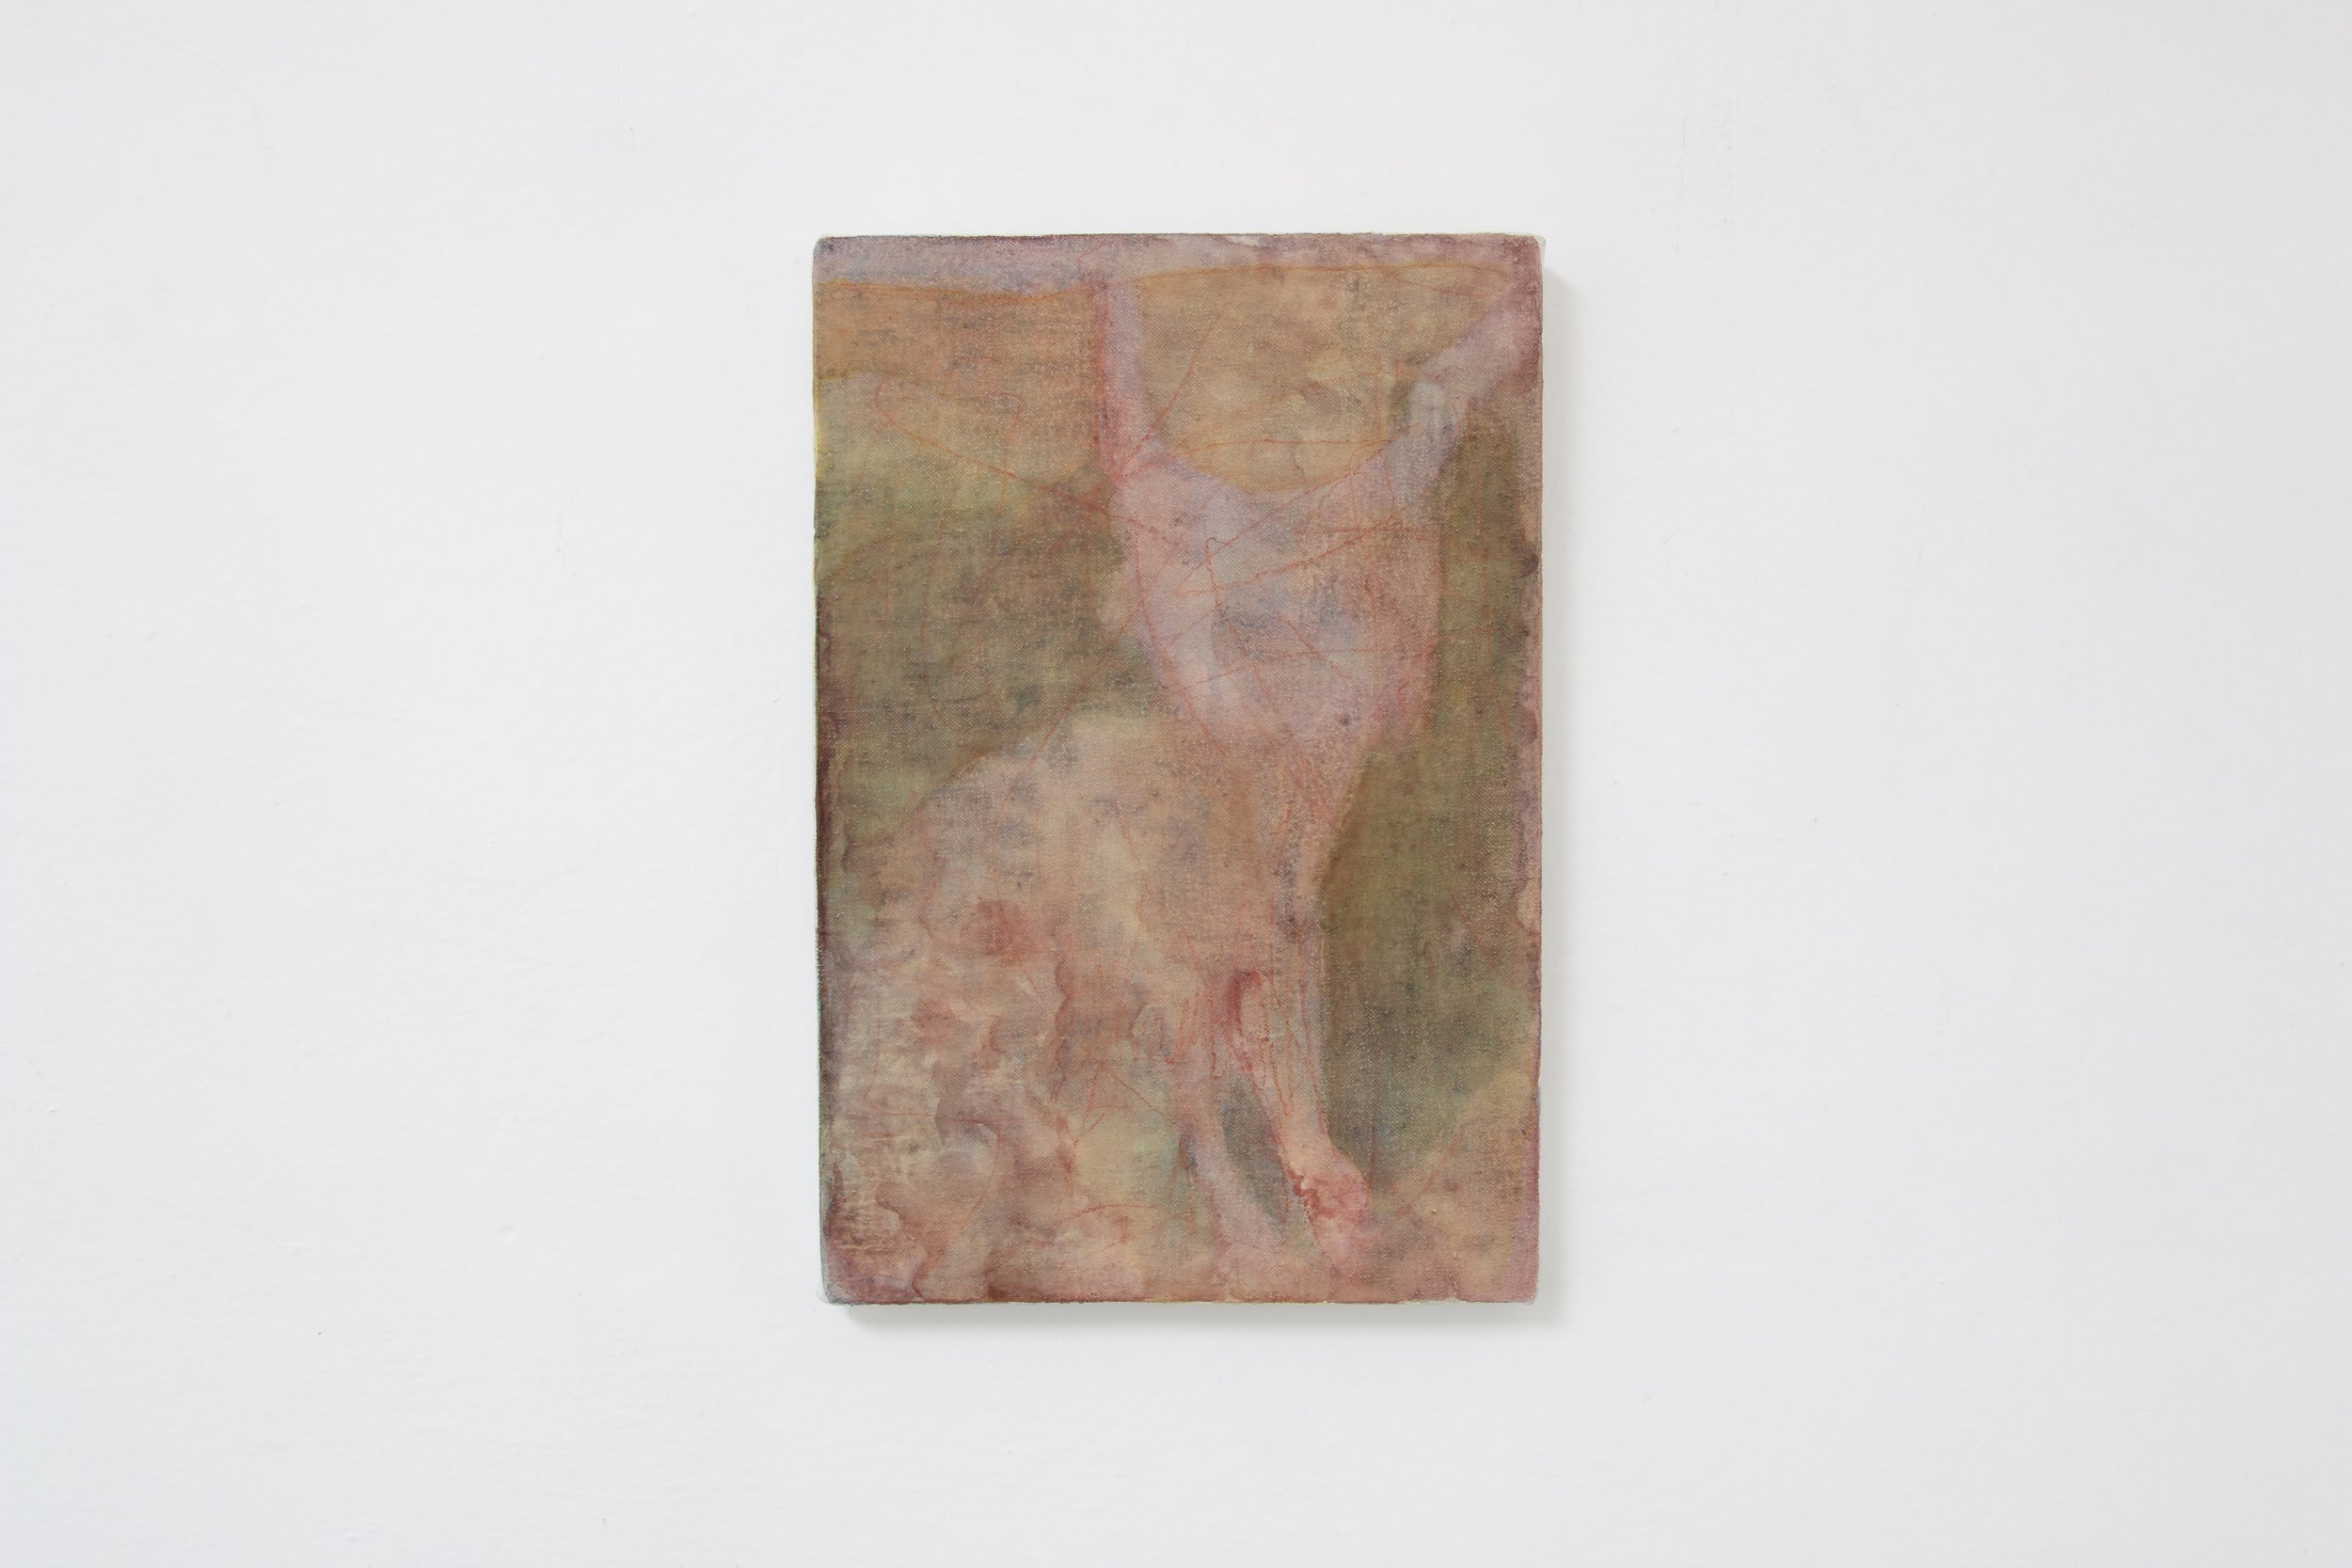   Coyote , 2021, oil on linen mounted on wood, 30.5 x 21 cm / 12 x 8.2 cm 